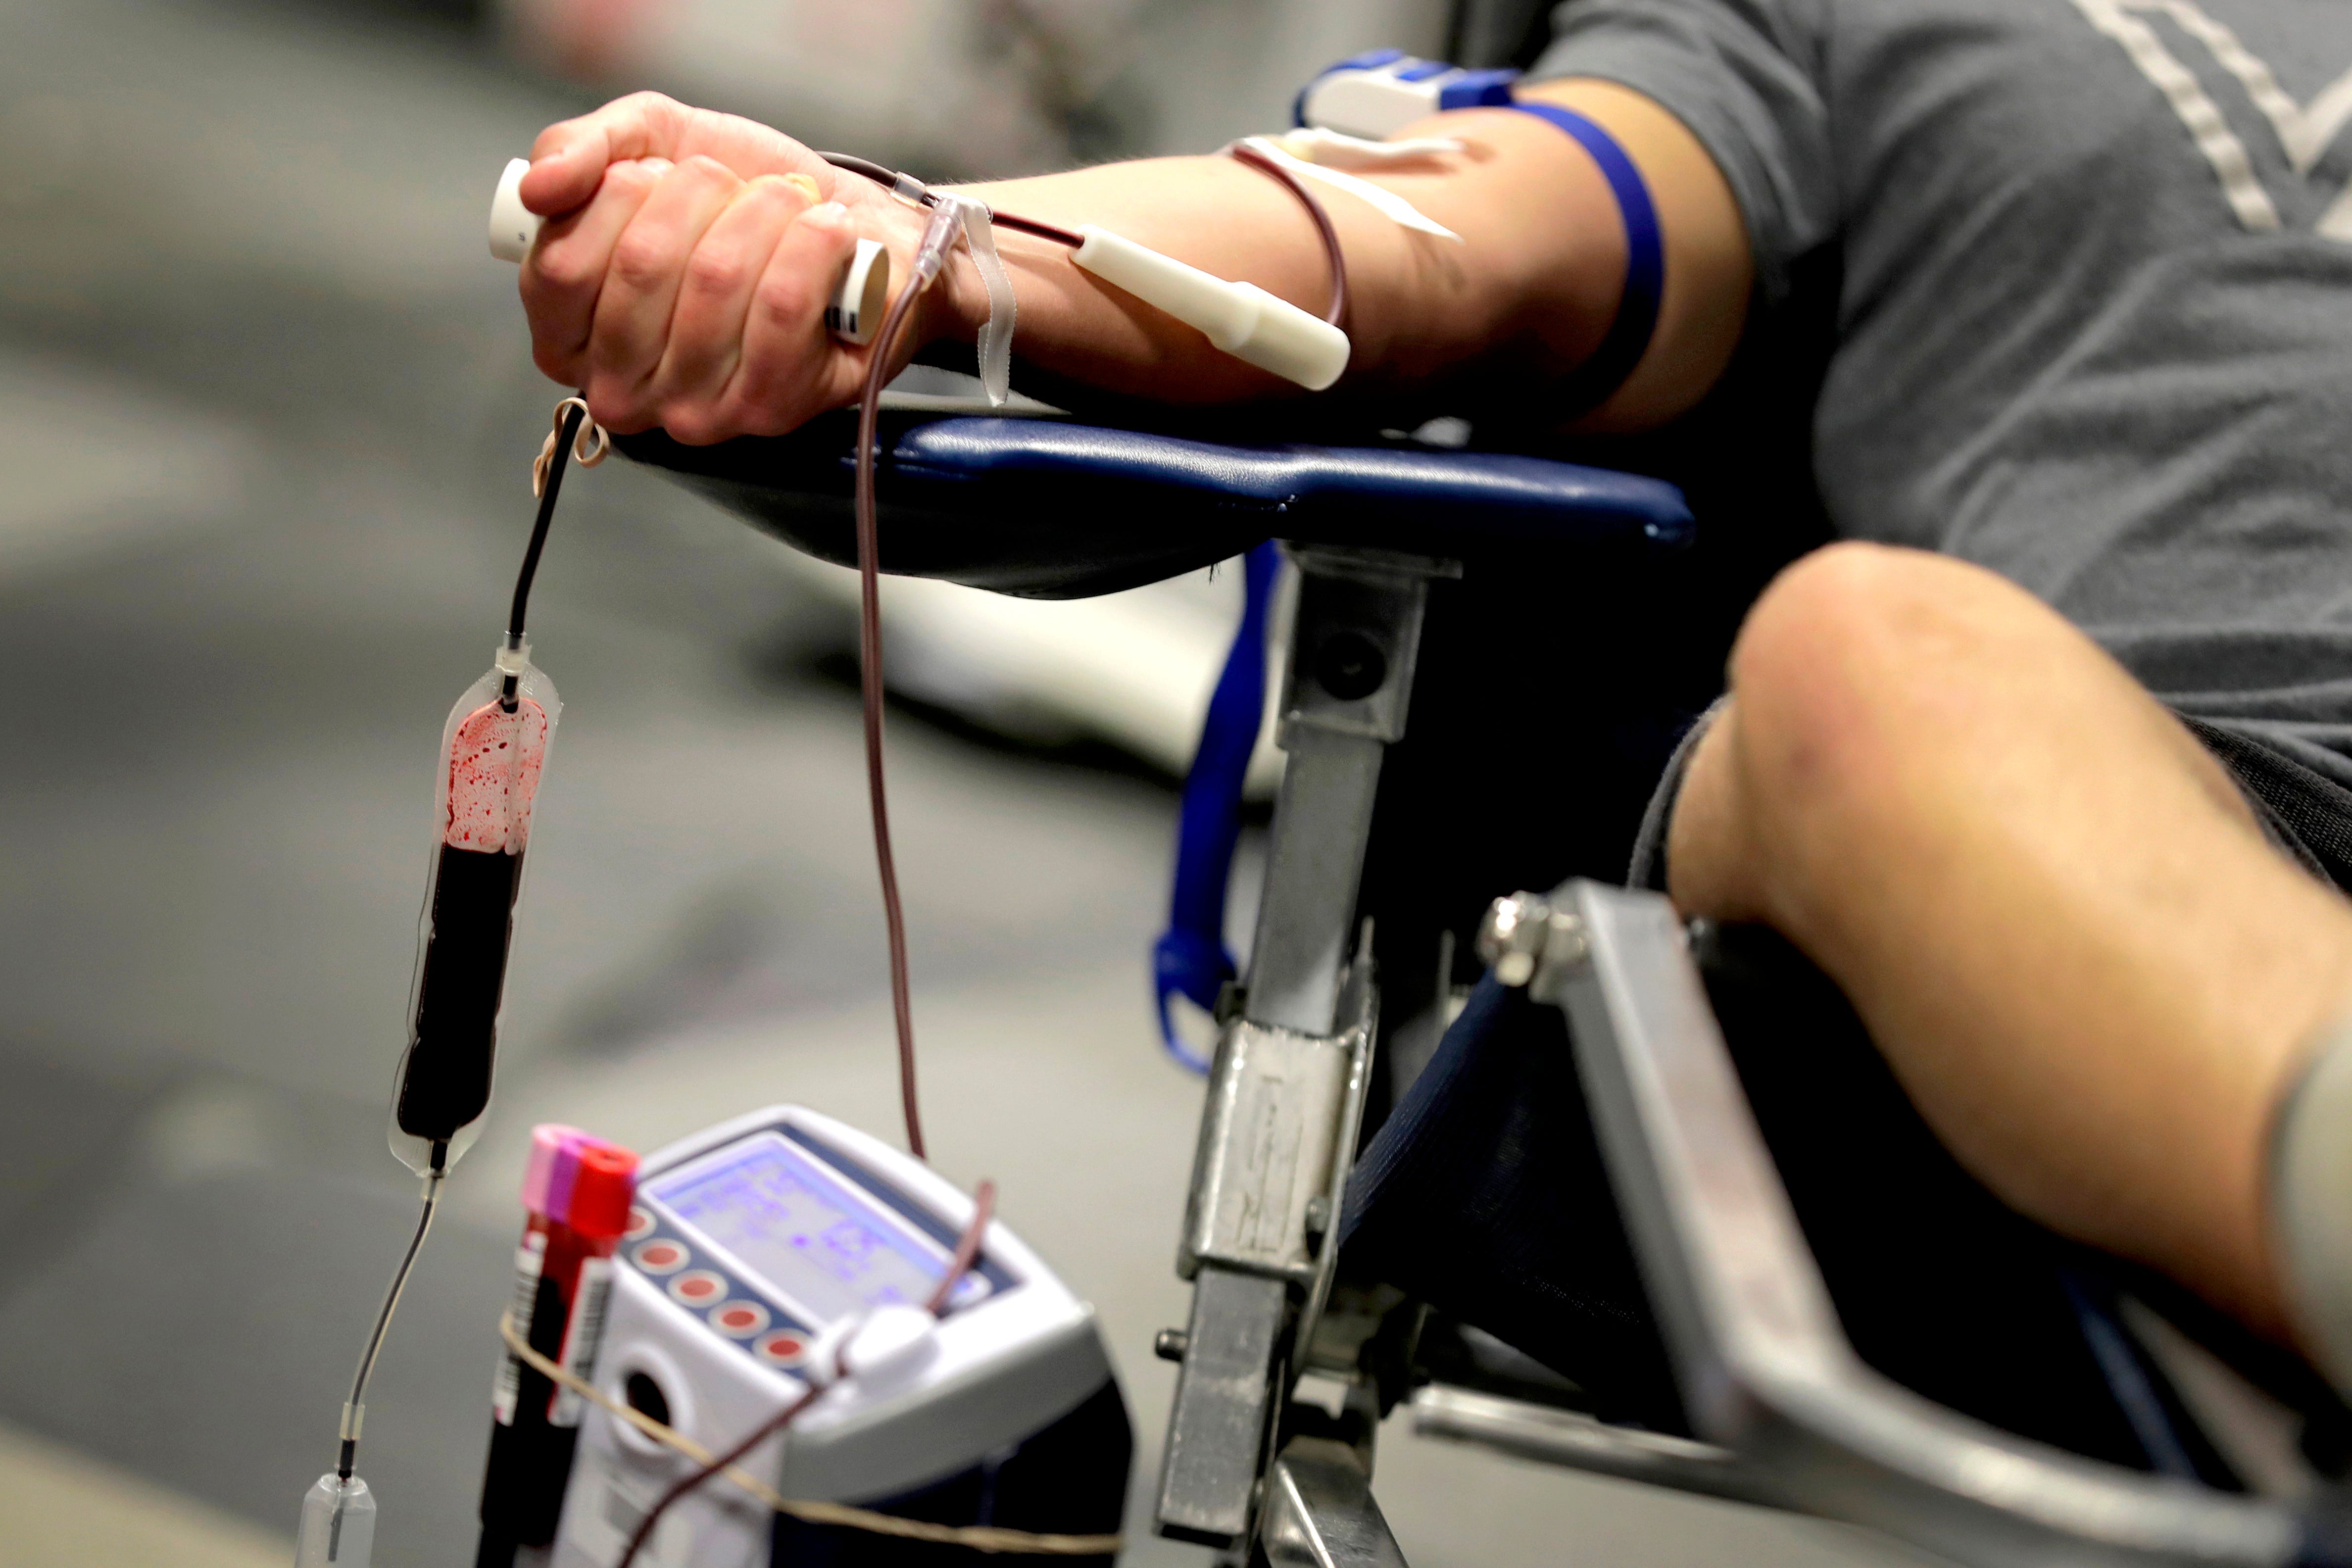 can gay men donate blood in the united states